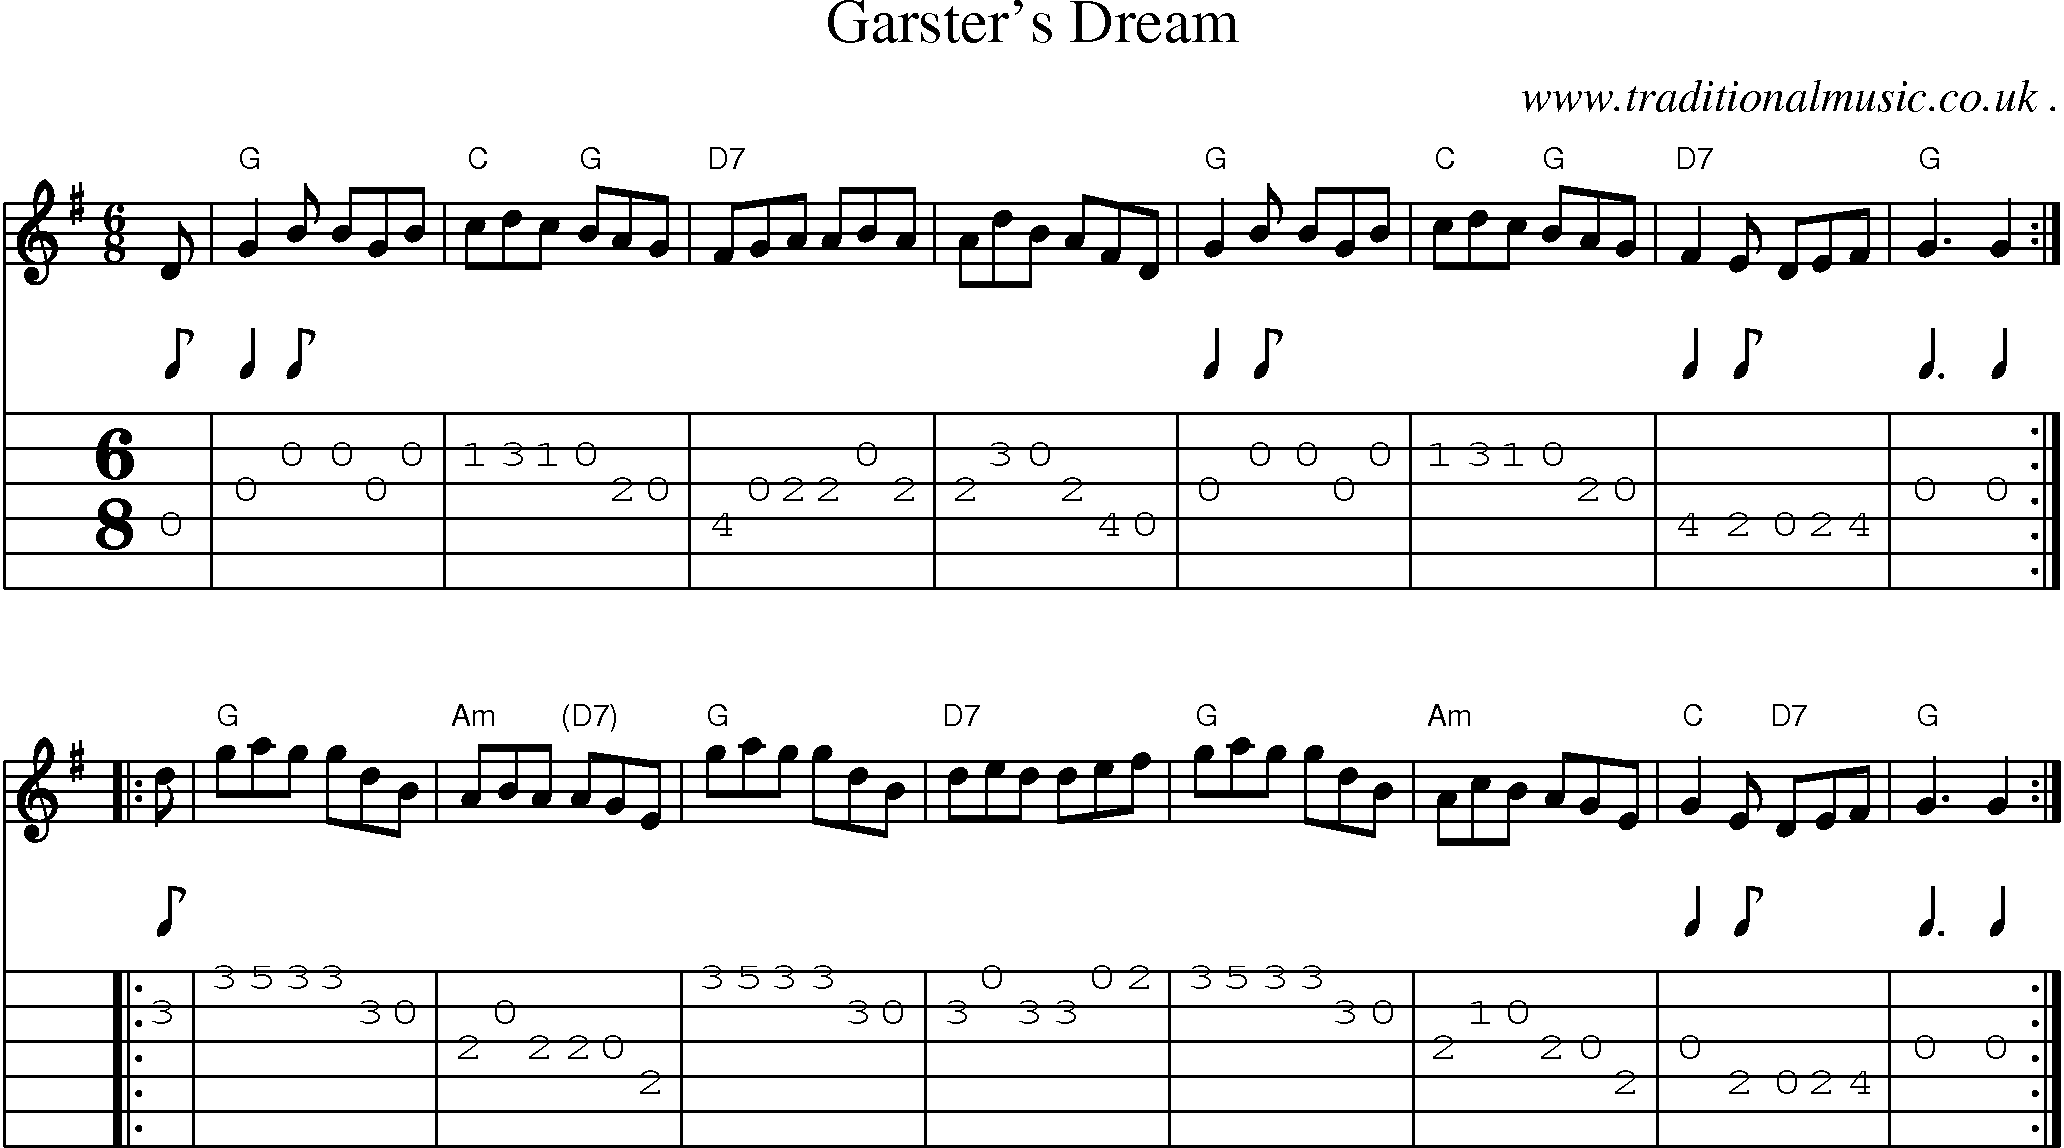 Sheet-music  score, Chords and Guitar Tabs for Garsters Dream